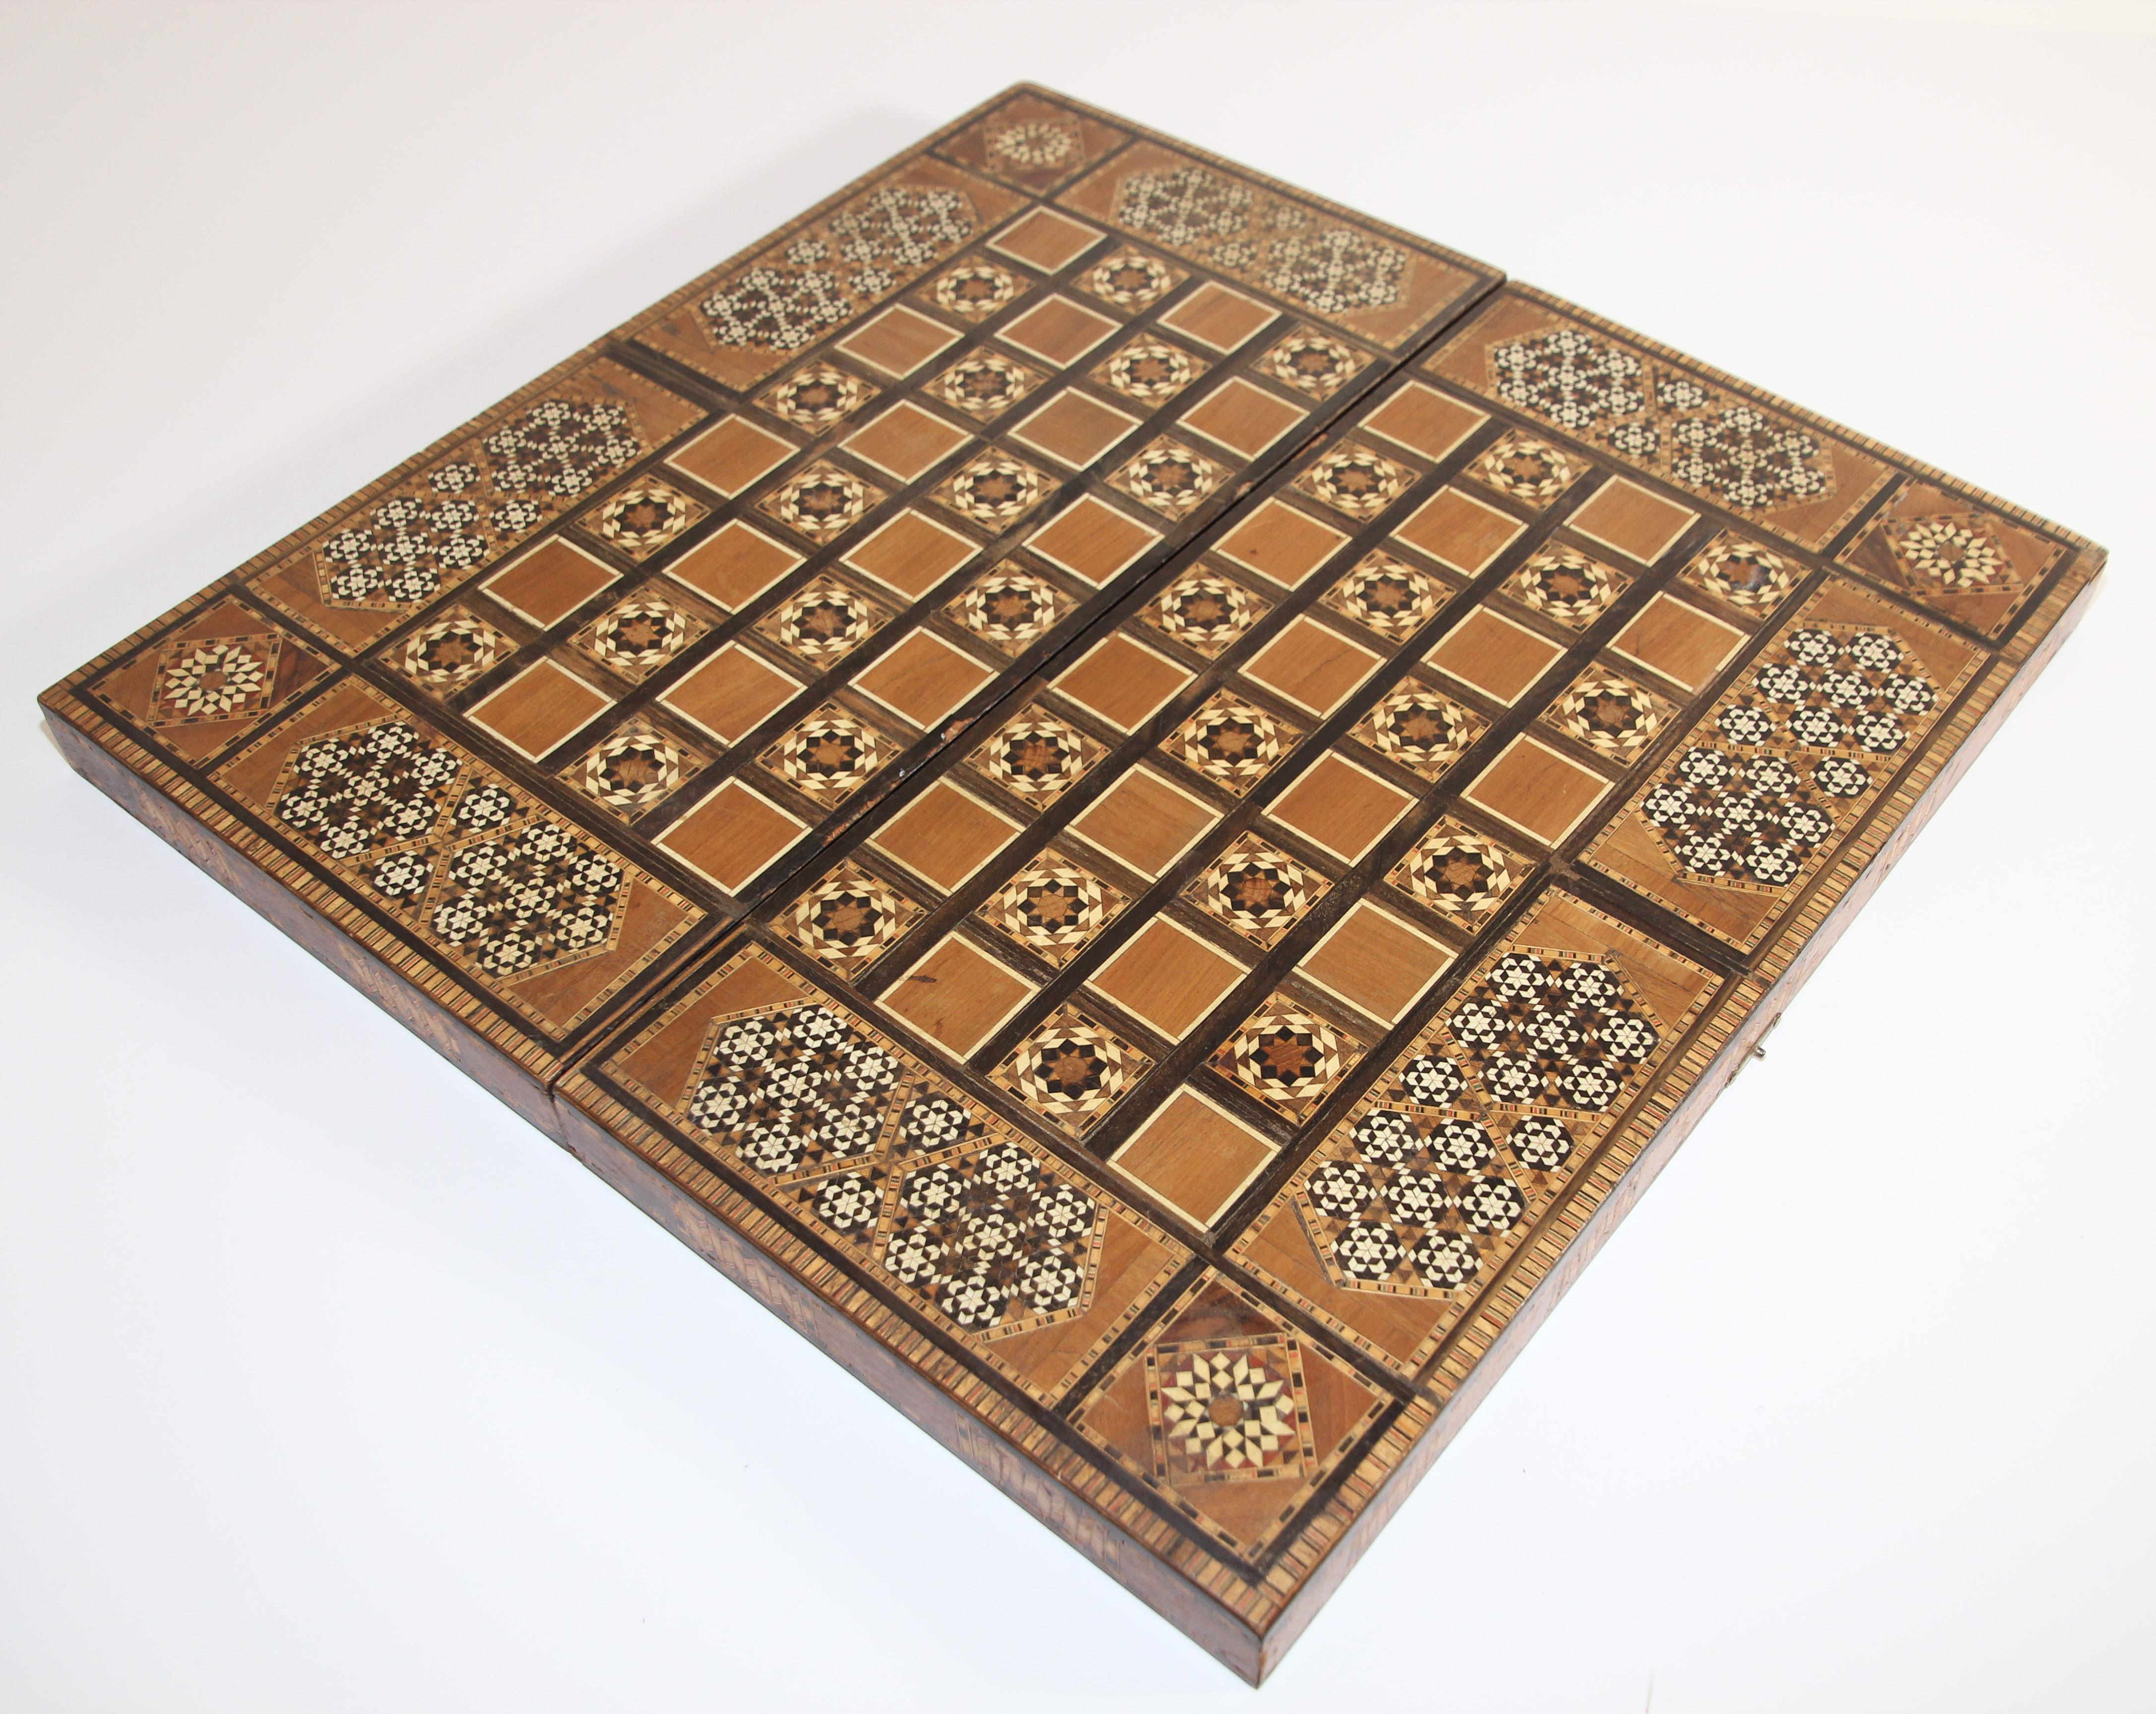 Antique Large Middle Eastern Inlaid Mosaic Backgammon and Chess Game 4